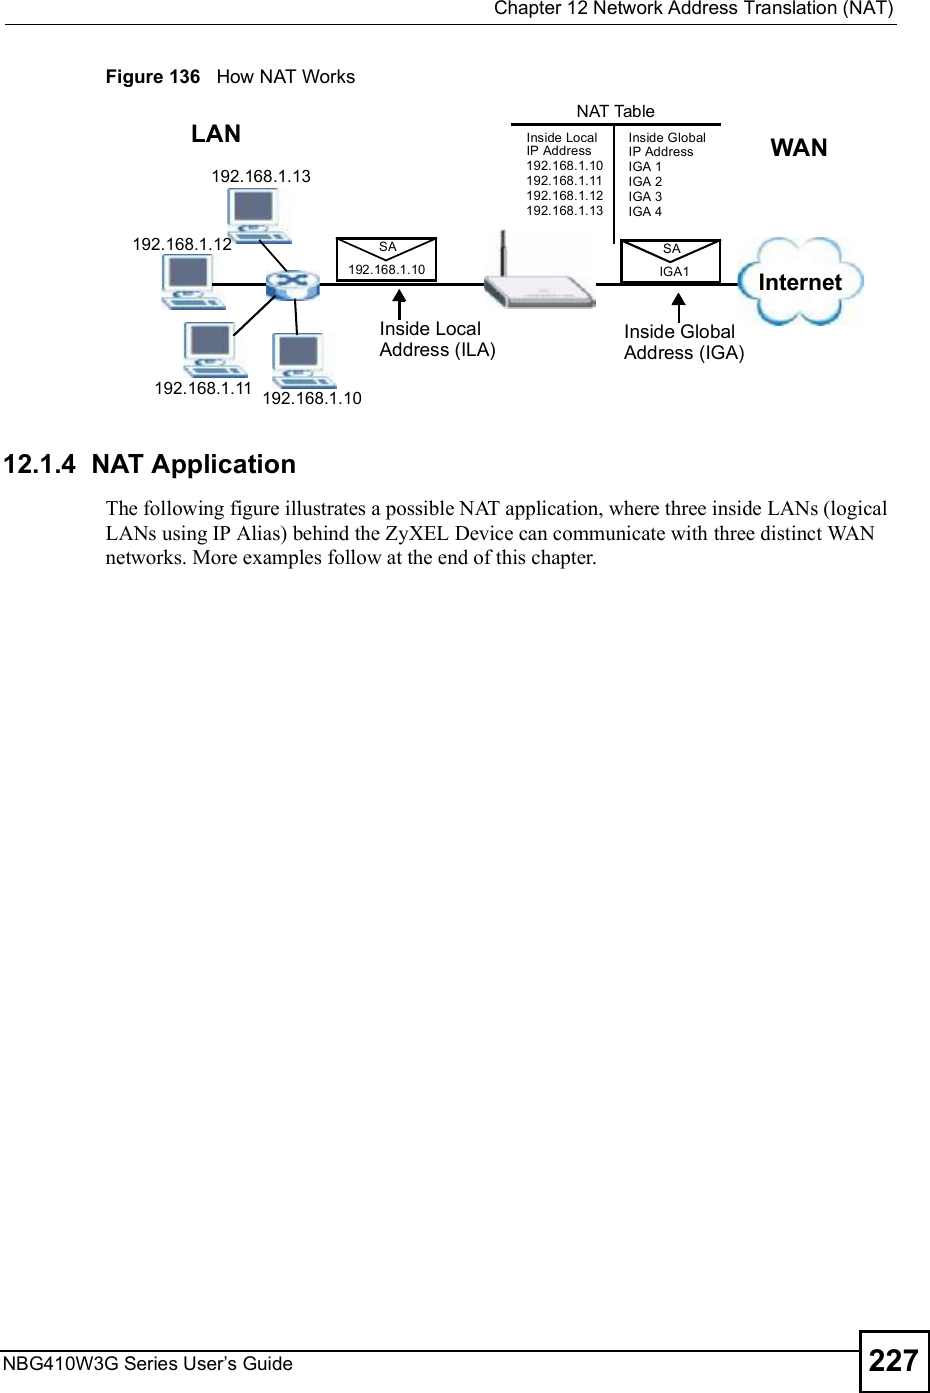  Chapter 12Network Address Translation (NAT)NBG410W3G Series User s Guide 227Figure 136   How NAT Works 12.1.4  NAT ApplicationThe following figure illustrates a possible NAT application, where three inside LANs (logical LANs using IP Alias) behind the ZyXEL Device can communicate with three distinct WAN networks. More examples follow at the end of this chapter.192.168.1.13192.168.1.10192.168.1.11192.168.1.12 SA192.168.1.10SAIGA1Inside LocalIP Address192.168.1.10192.168.1.11192.168.1.12192.168.1.13Inside Global IP AddressIGA 1IGA 2IGA 3IGA 4NAT TableInternetWANLANInside LocalAddress (ILA)Inside GlobalAddress (IGA)